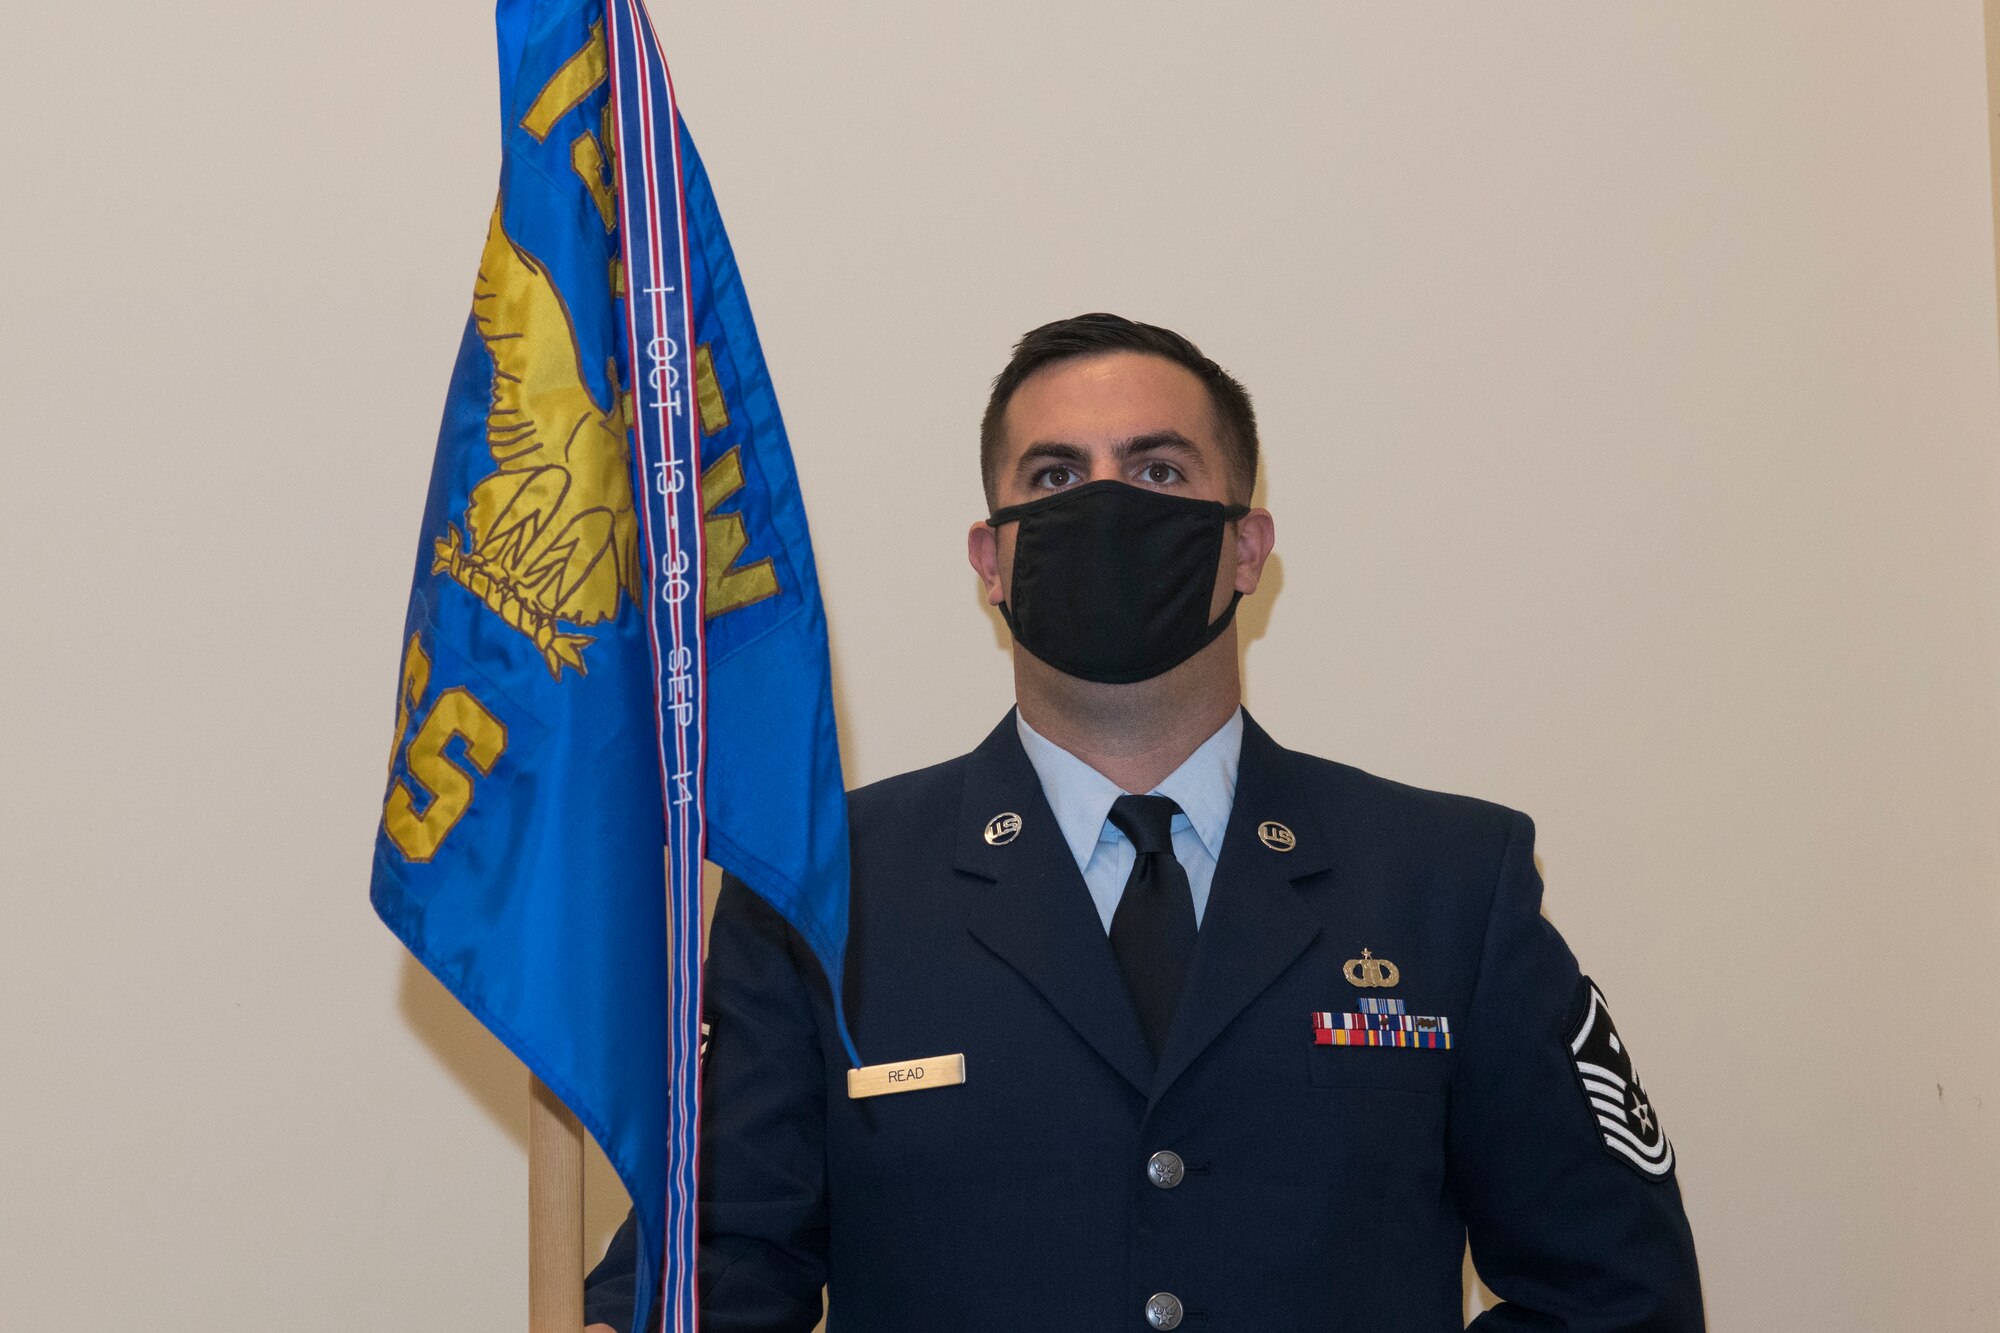 An Airman stand at attention while holding the unit's guidon